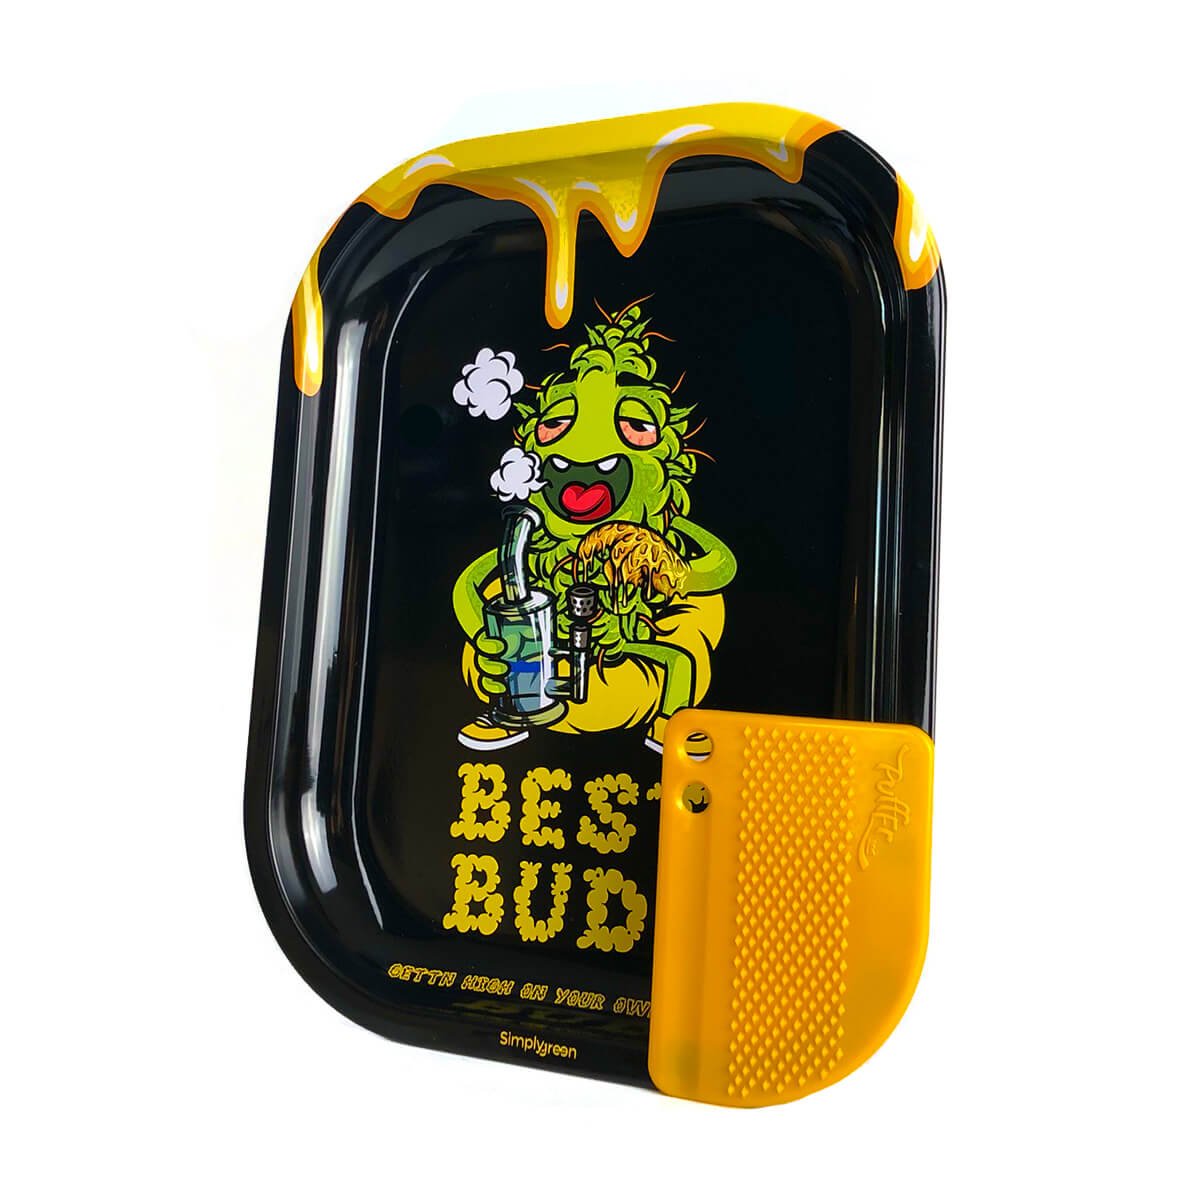 Best Buds - Dab metal rolling tray